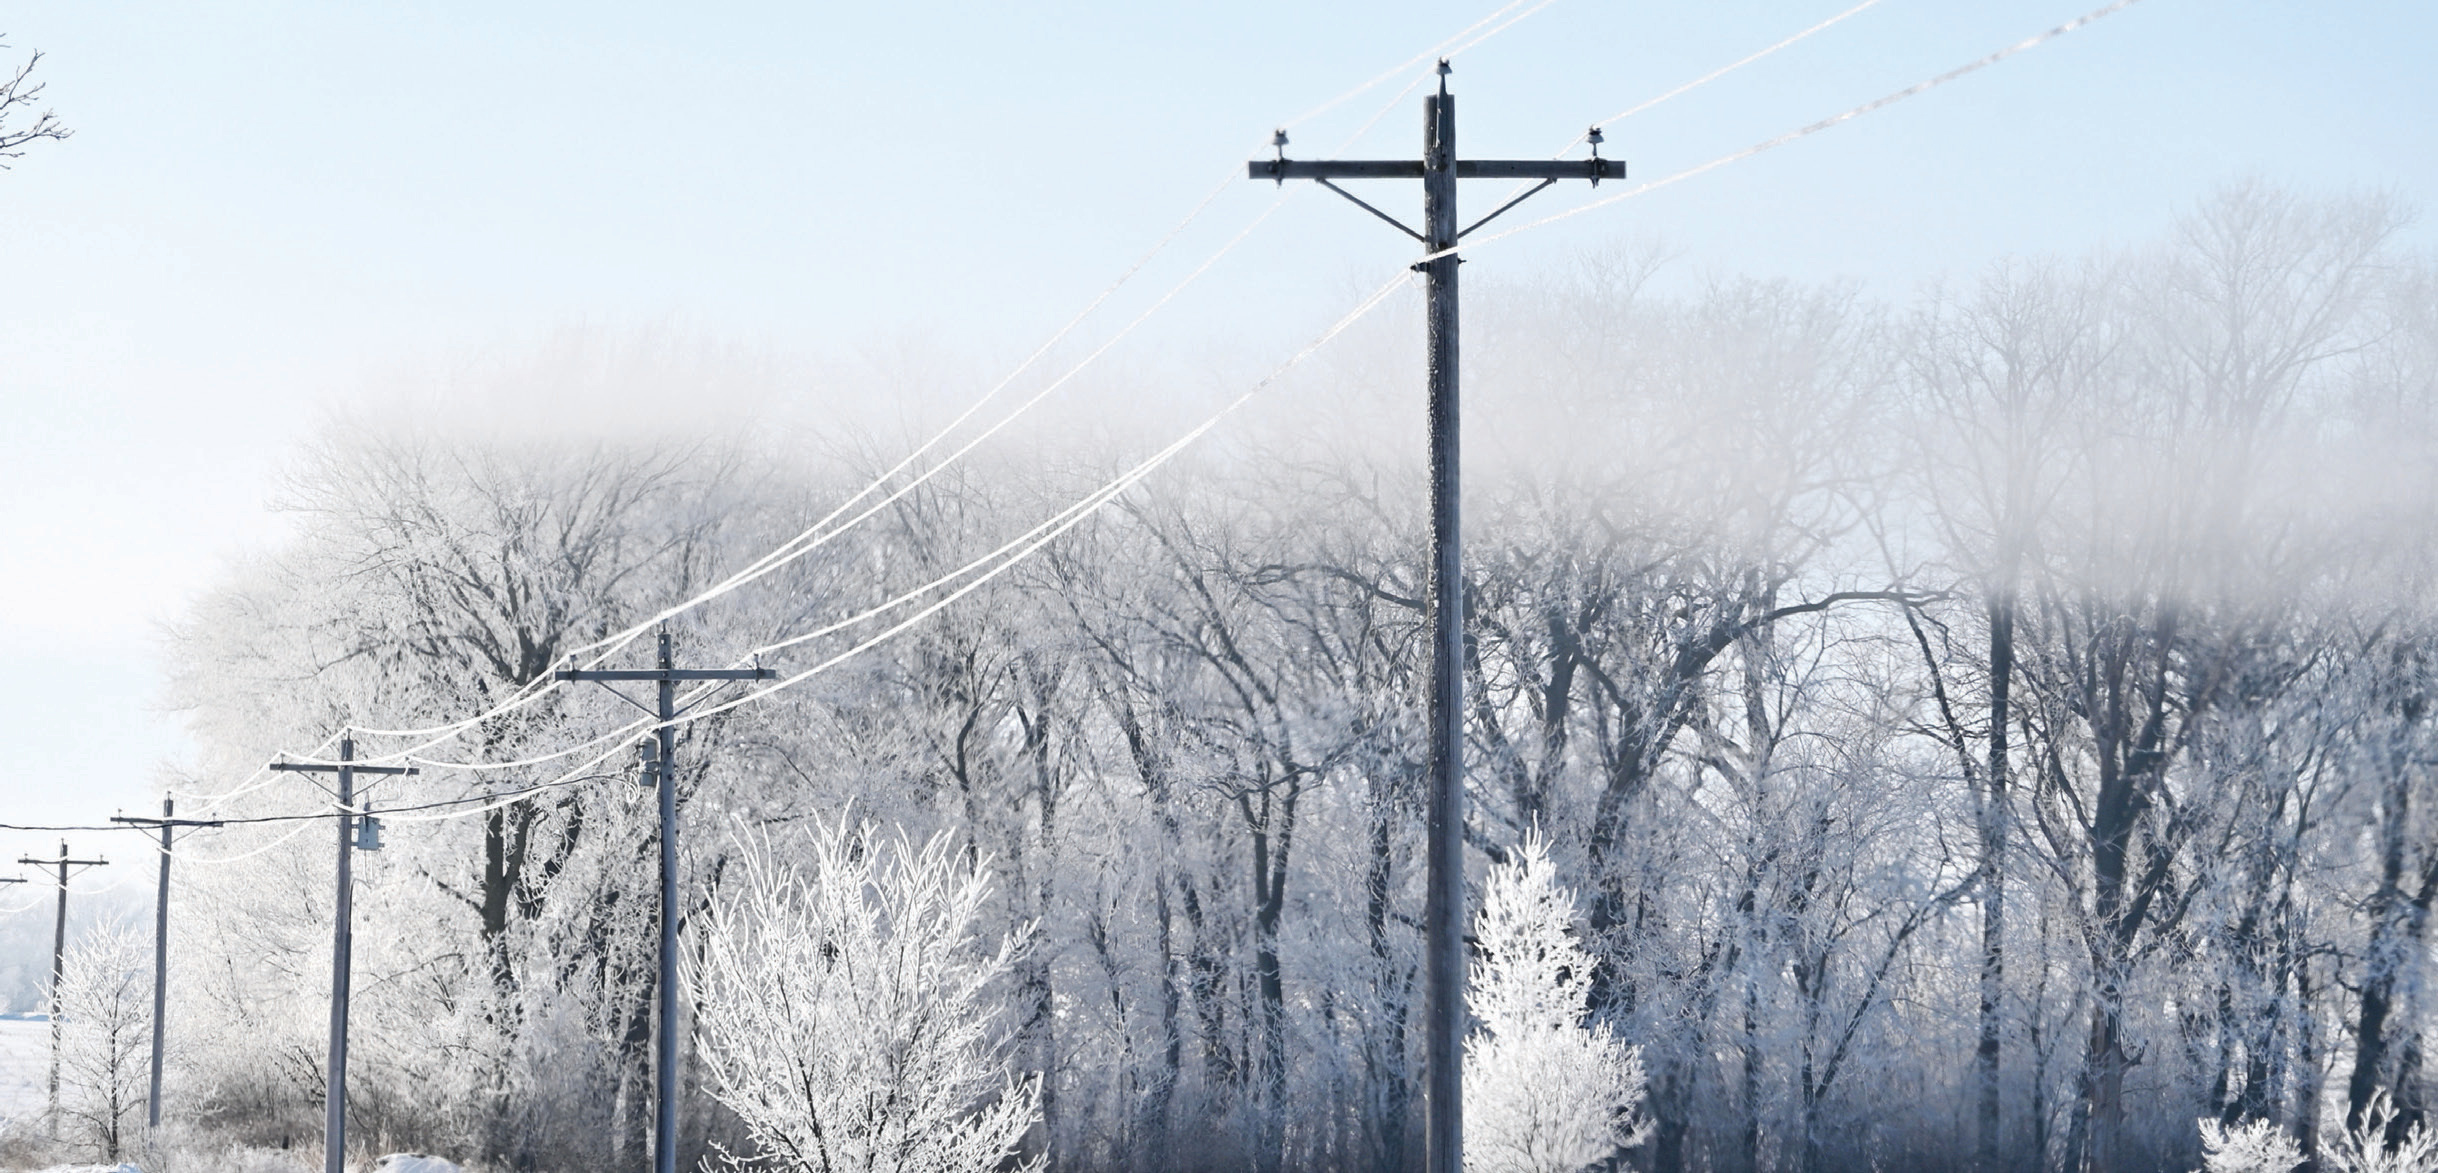 Winter scene with power lines